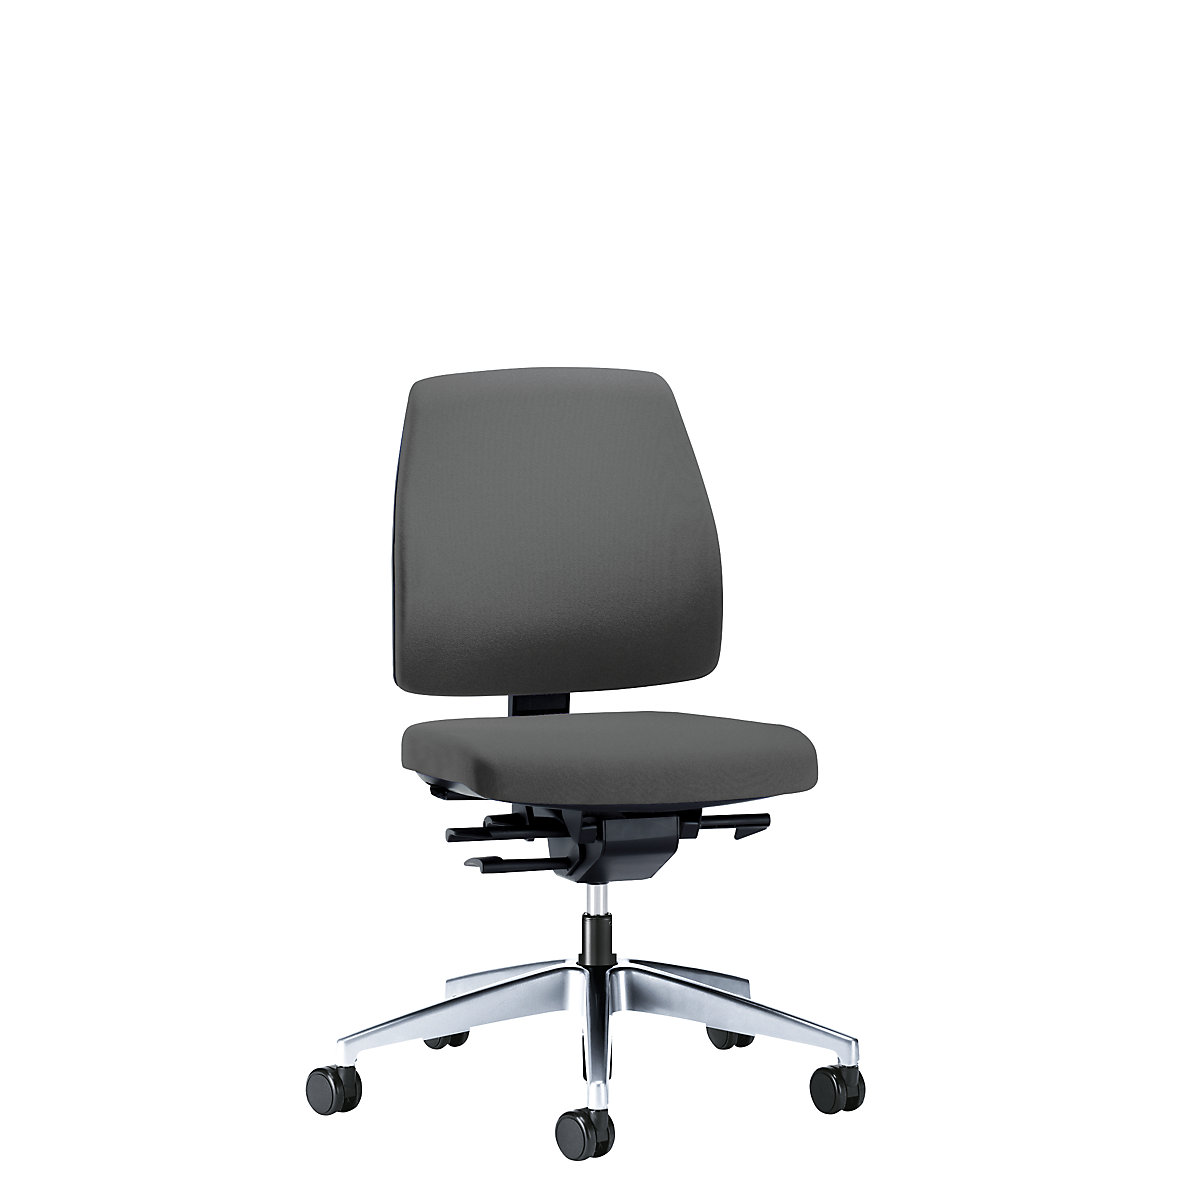 GOAL office swivel chair, back rest height 430 mm – interstuhl, polished frame, with hard castors, iron grey, seat depth 410 mm-5